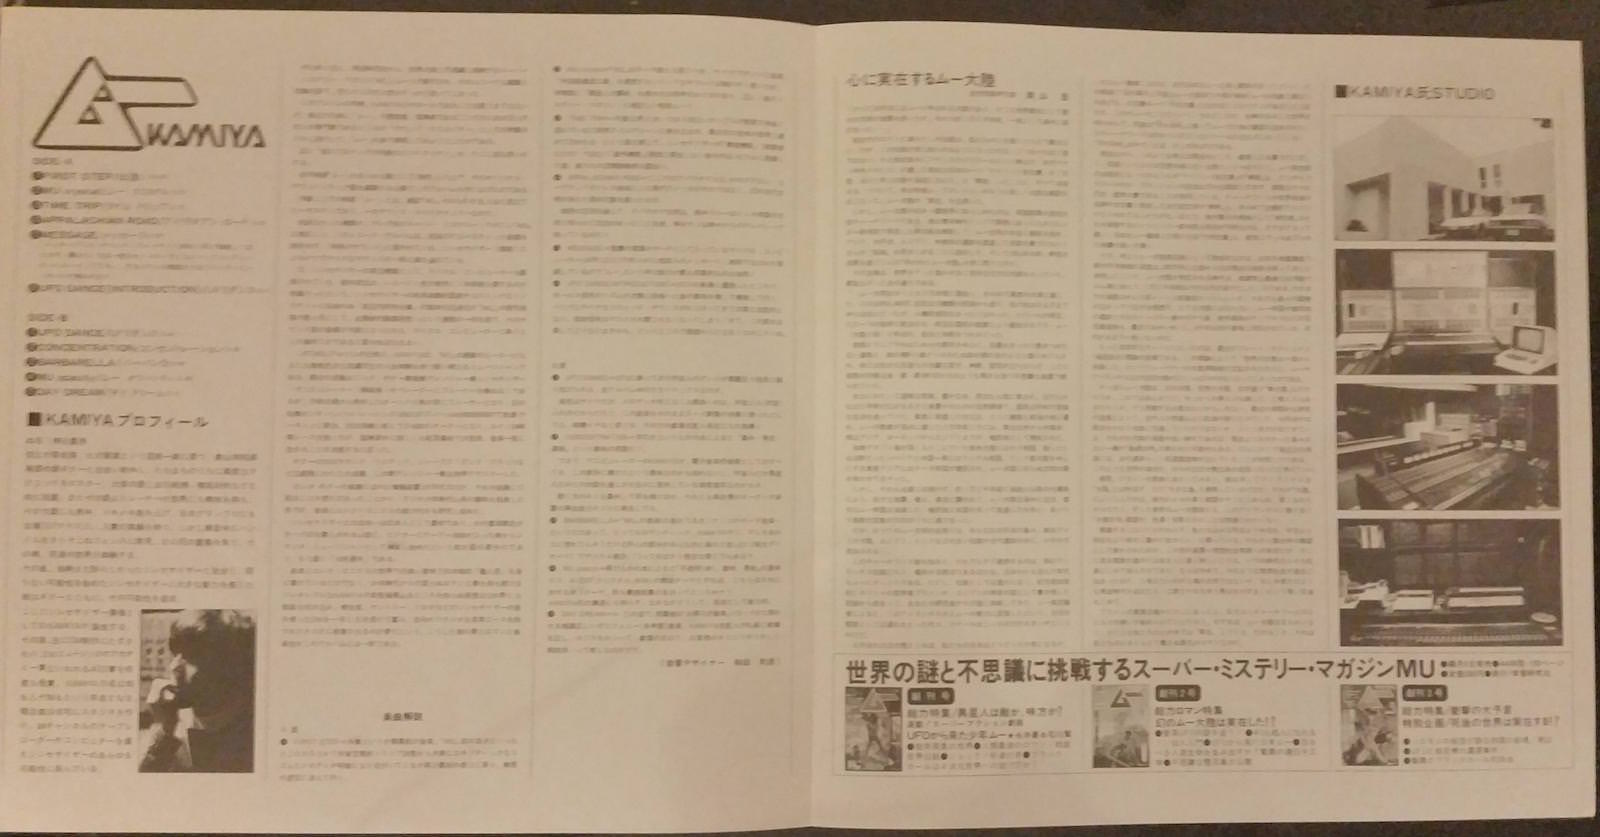 The full booklet. A lot of writing about the artist, the magazine and the songs, and even pictures of Kamiya's studio!